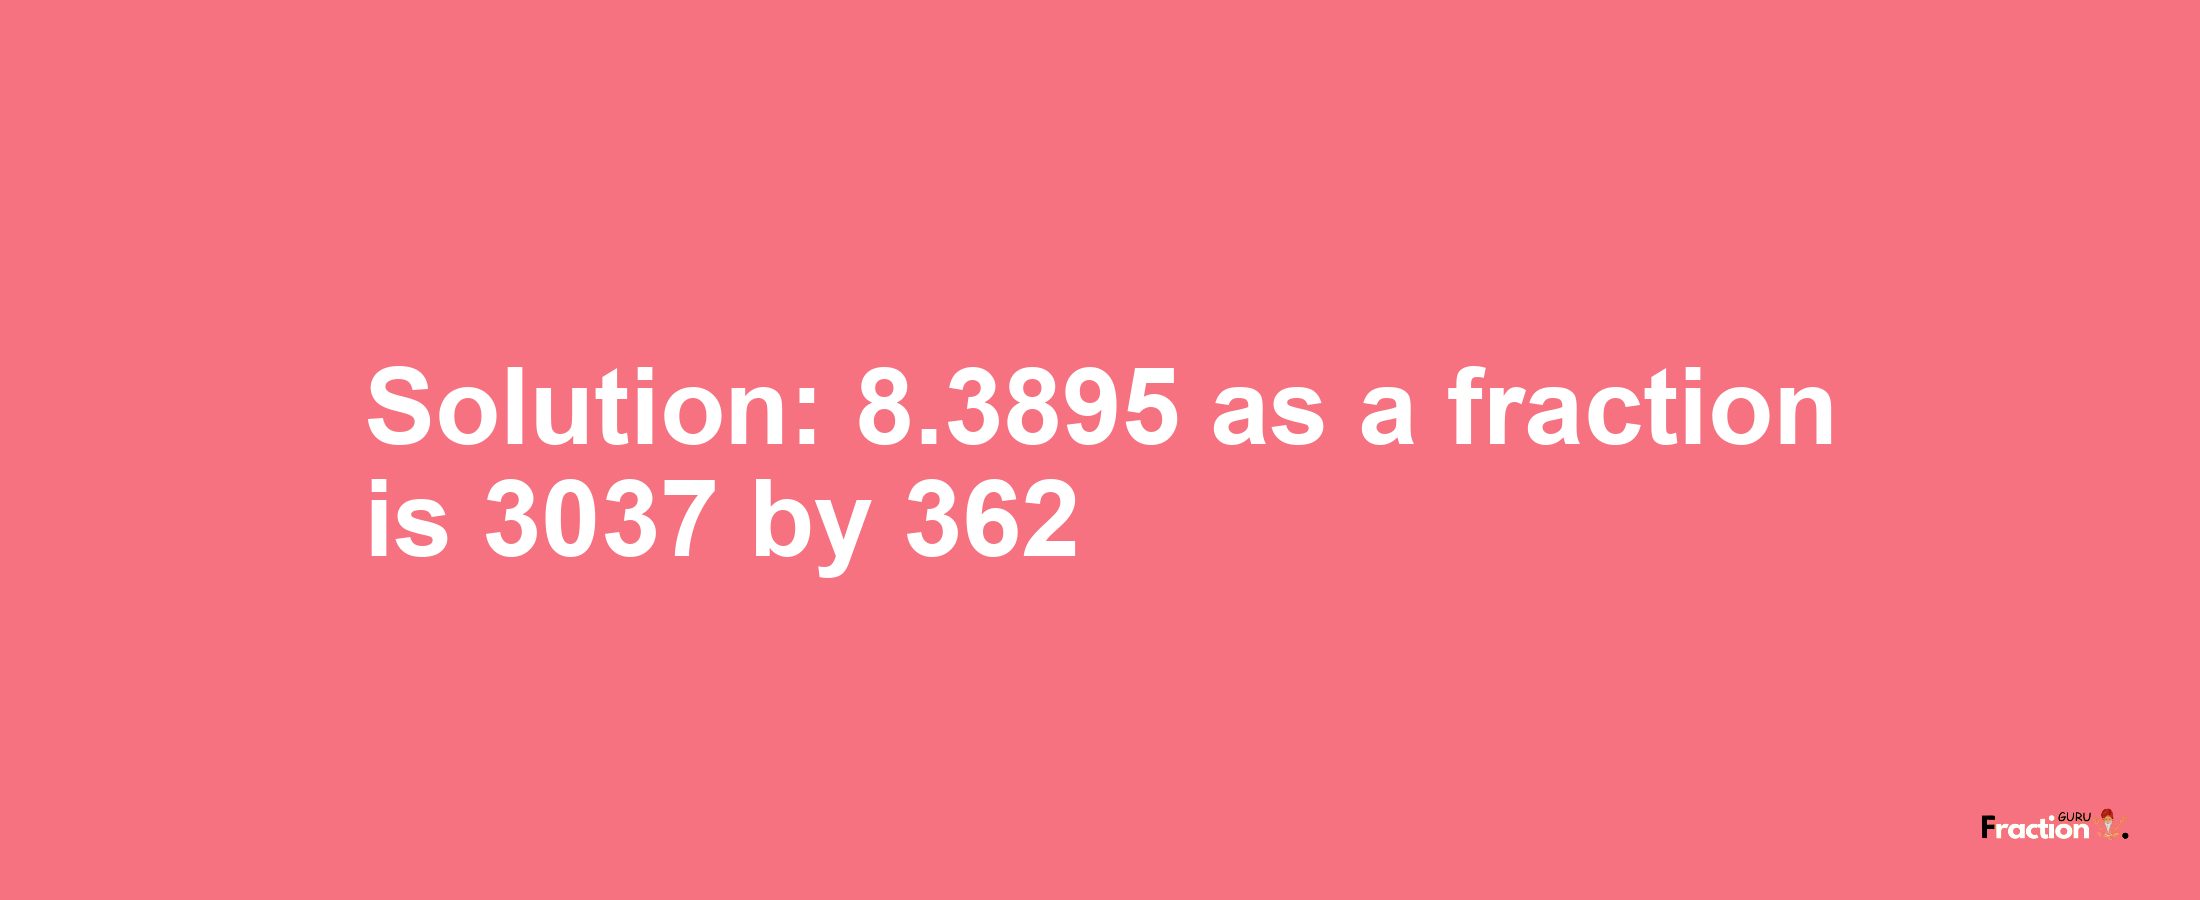 Solution:8.3895 as a fraction is 3037/362